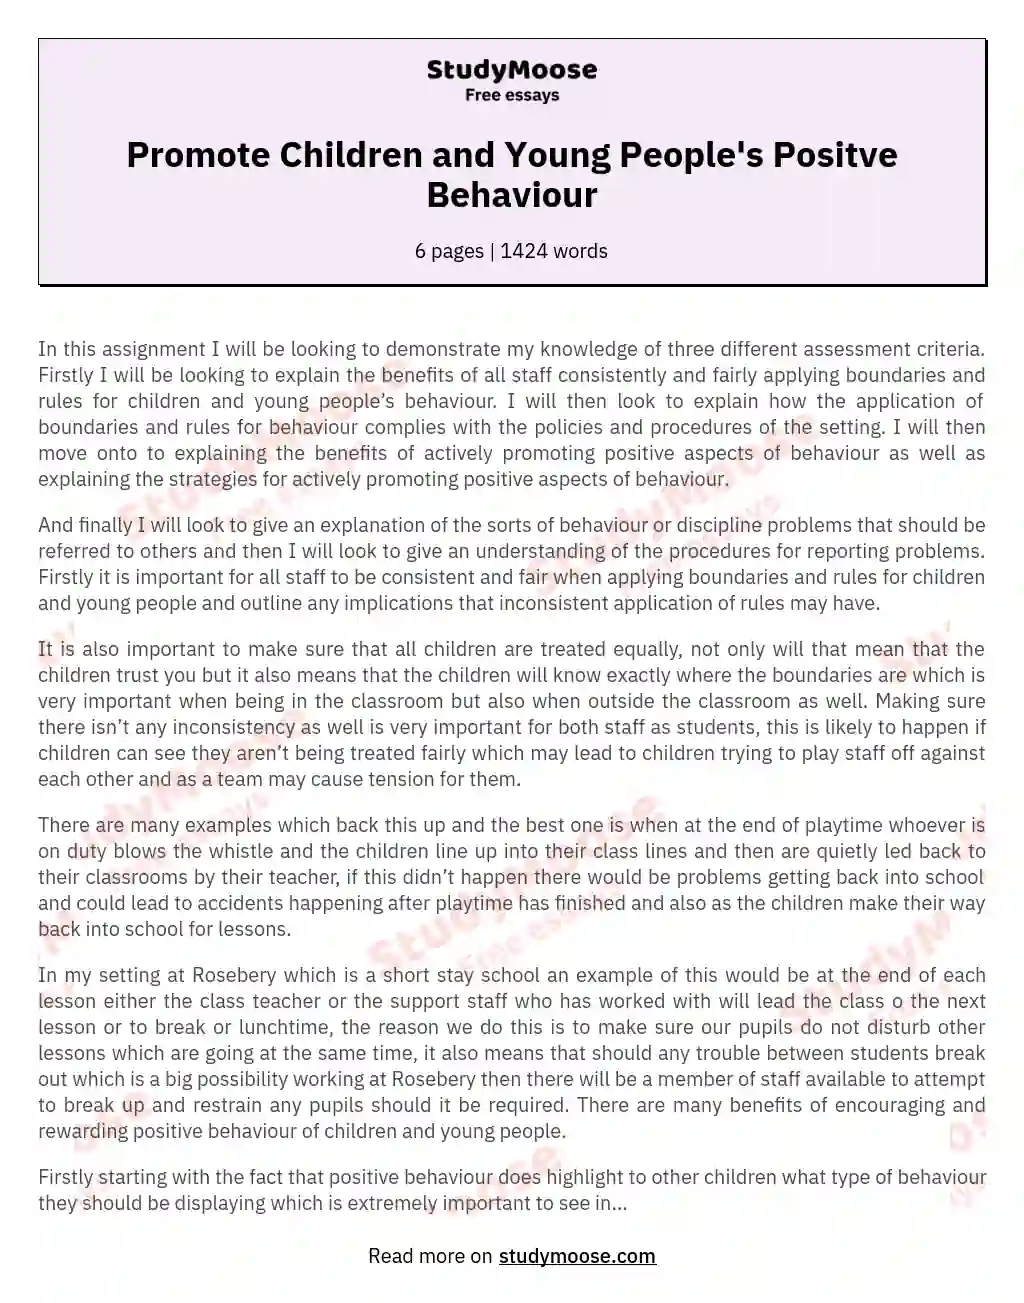 Promote Children and Young People's Positve Behaviour essay